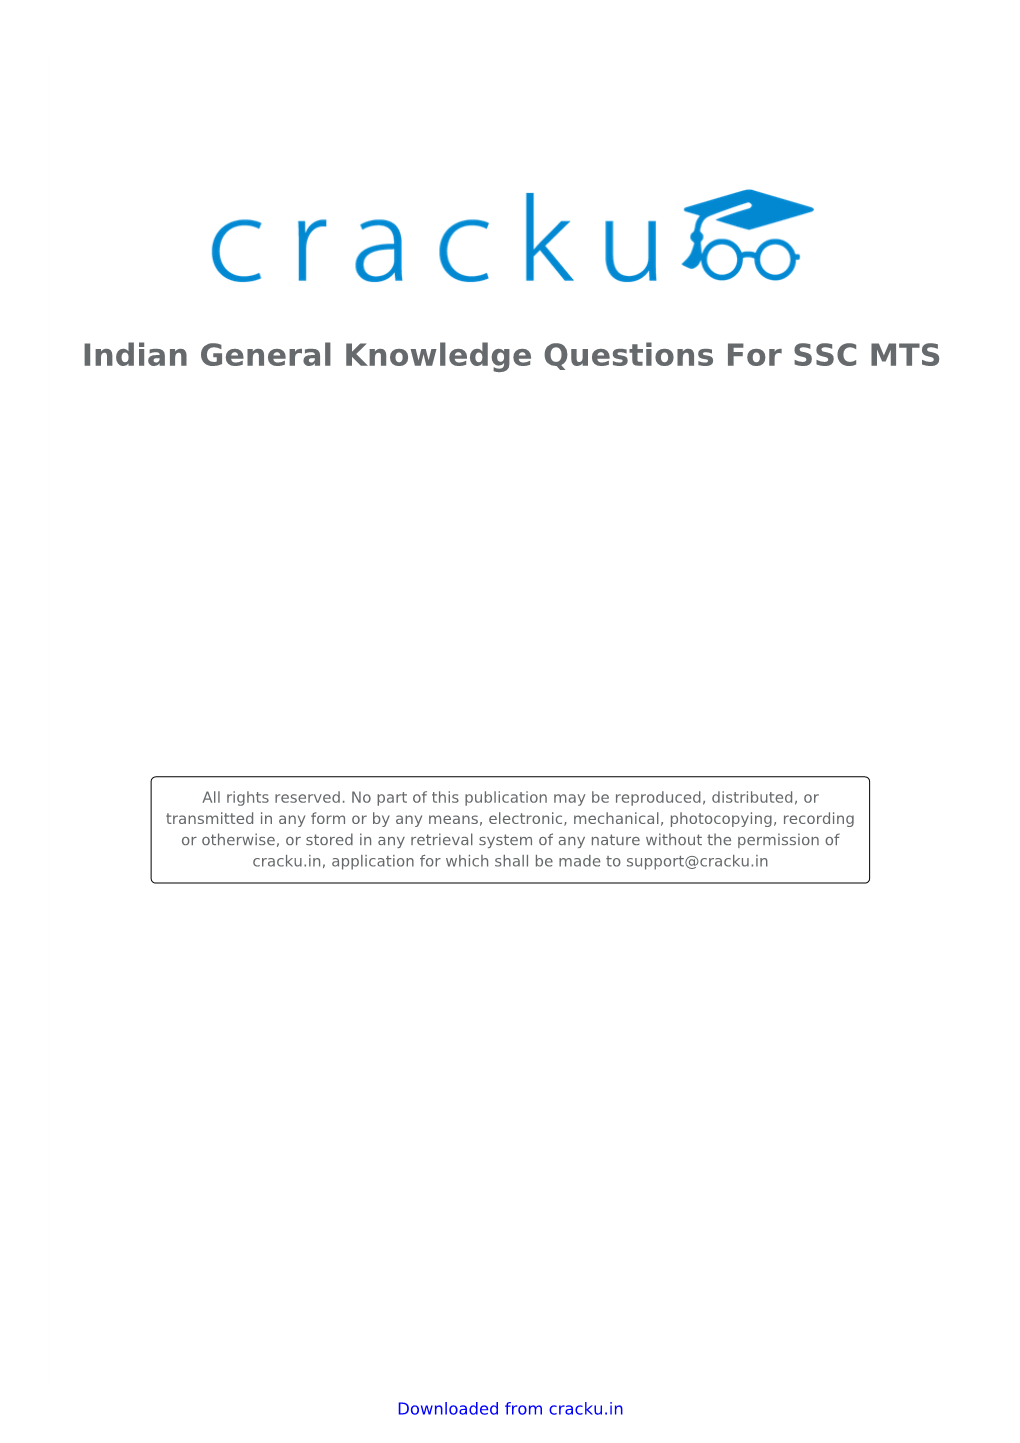 Download Indian General Knowledge Questions for SSC